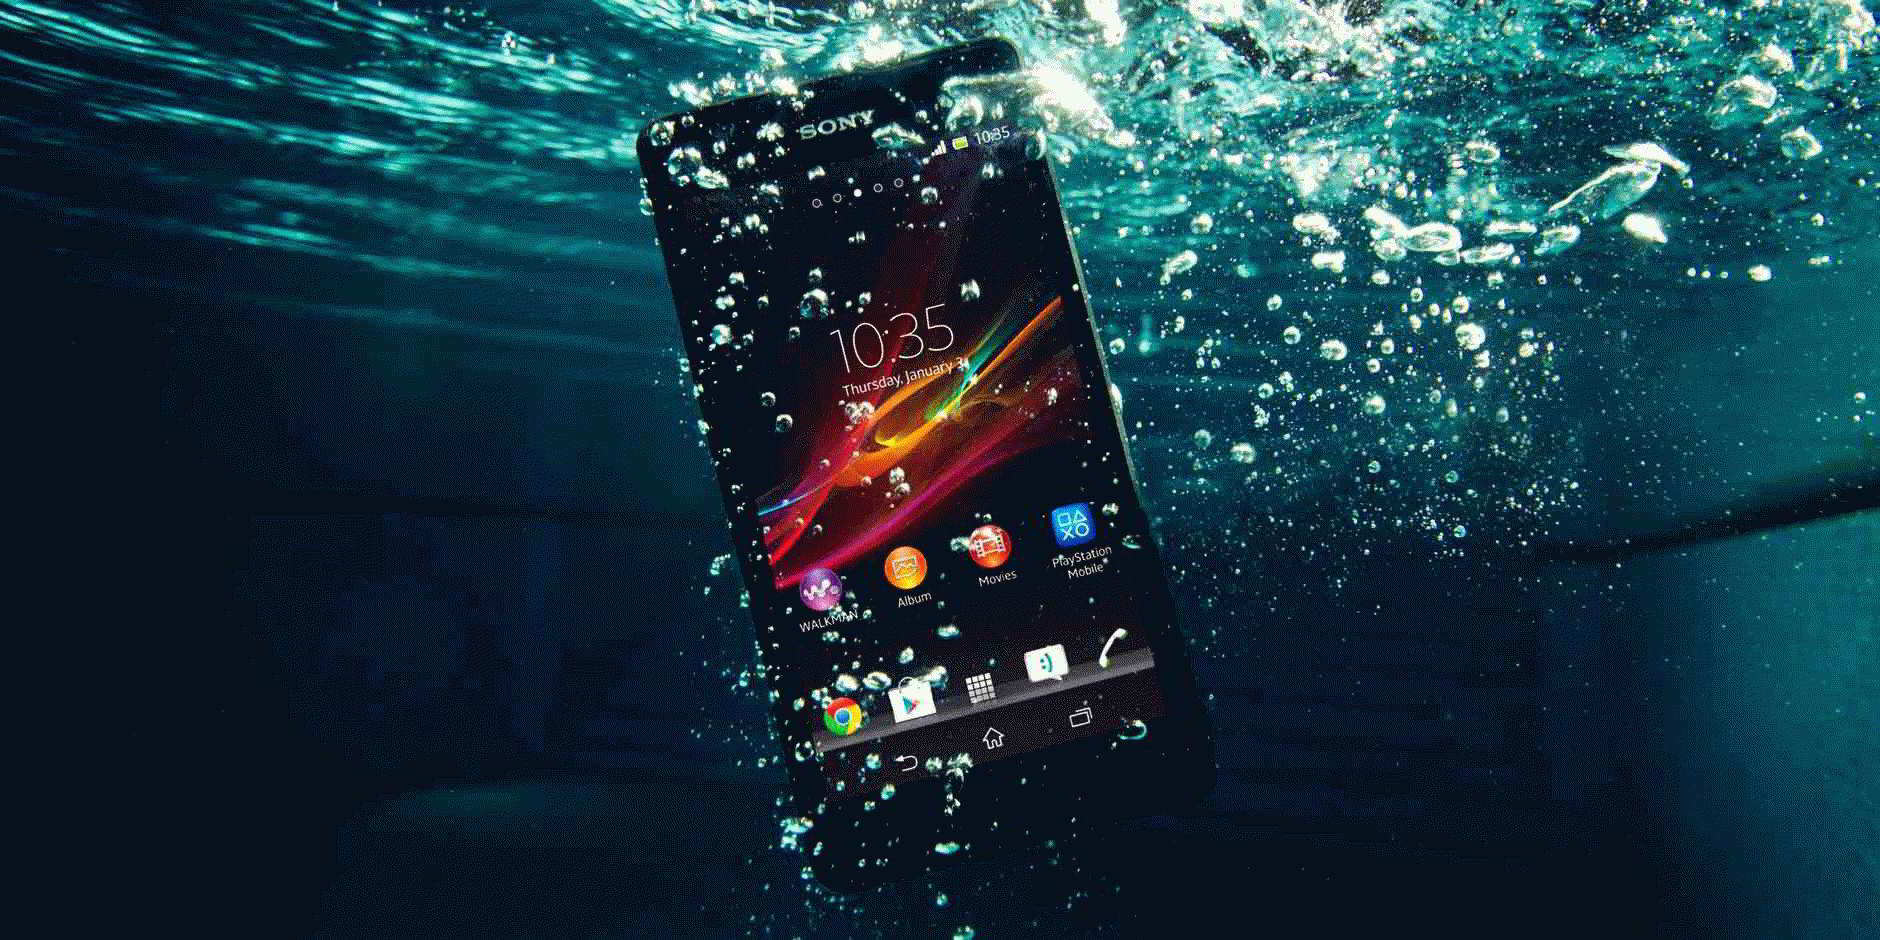 Top ranking of the best rugged smartphones 2019 for price and quality